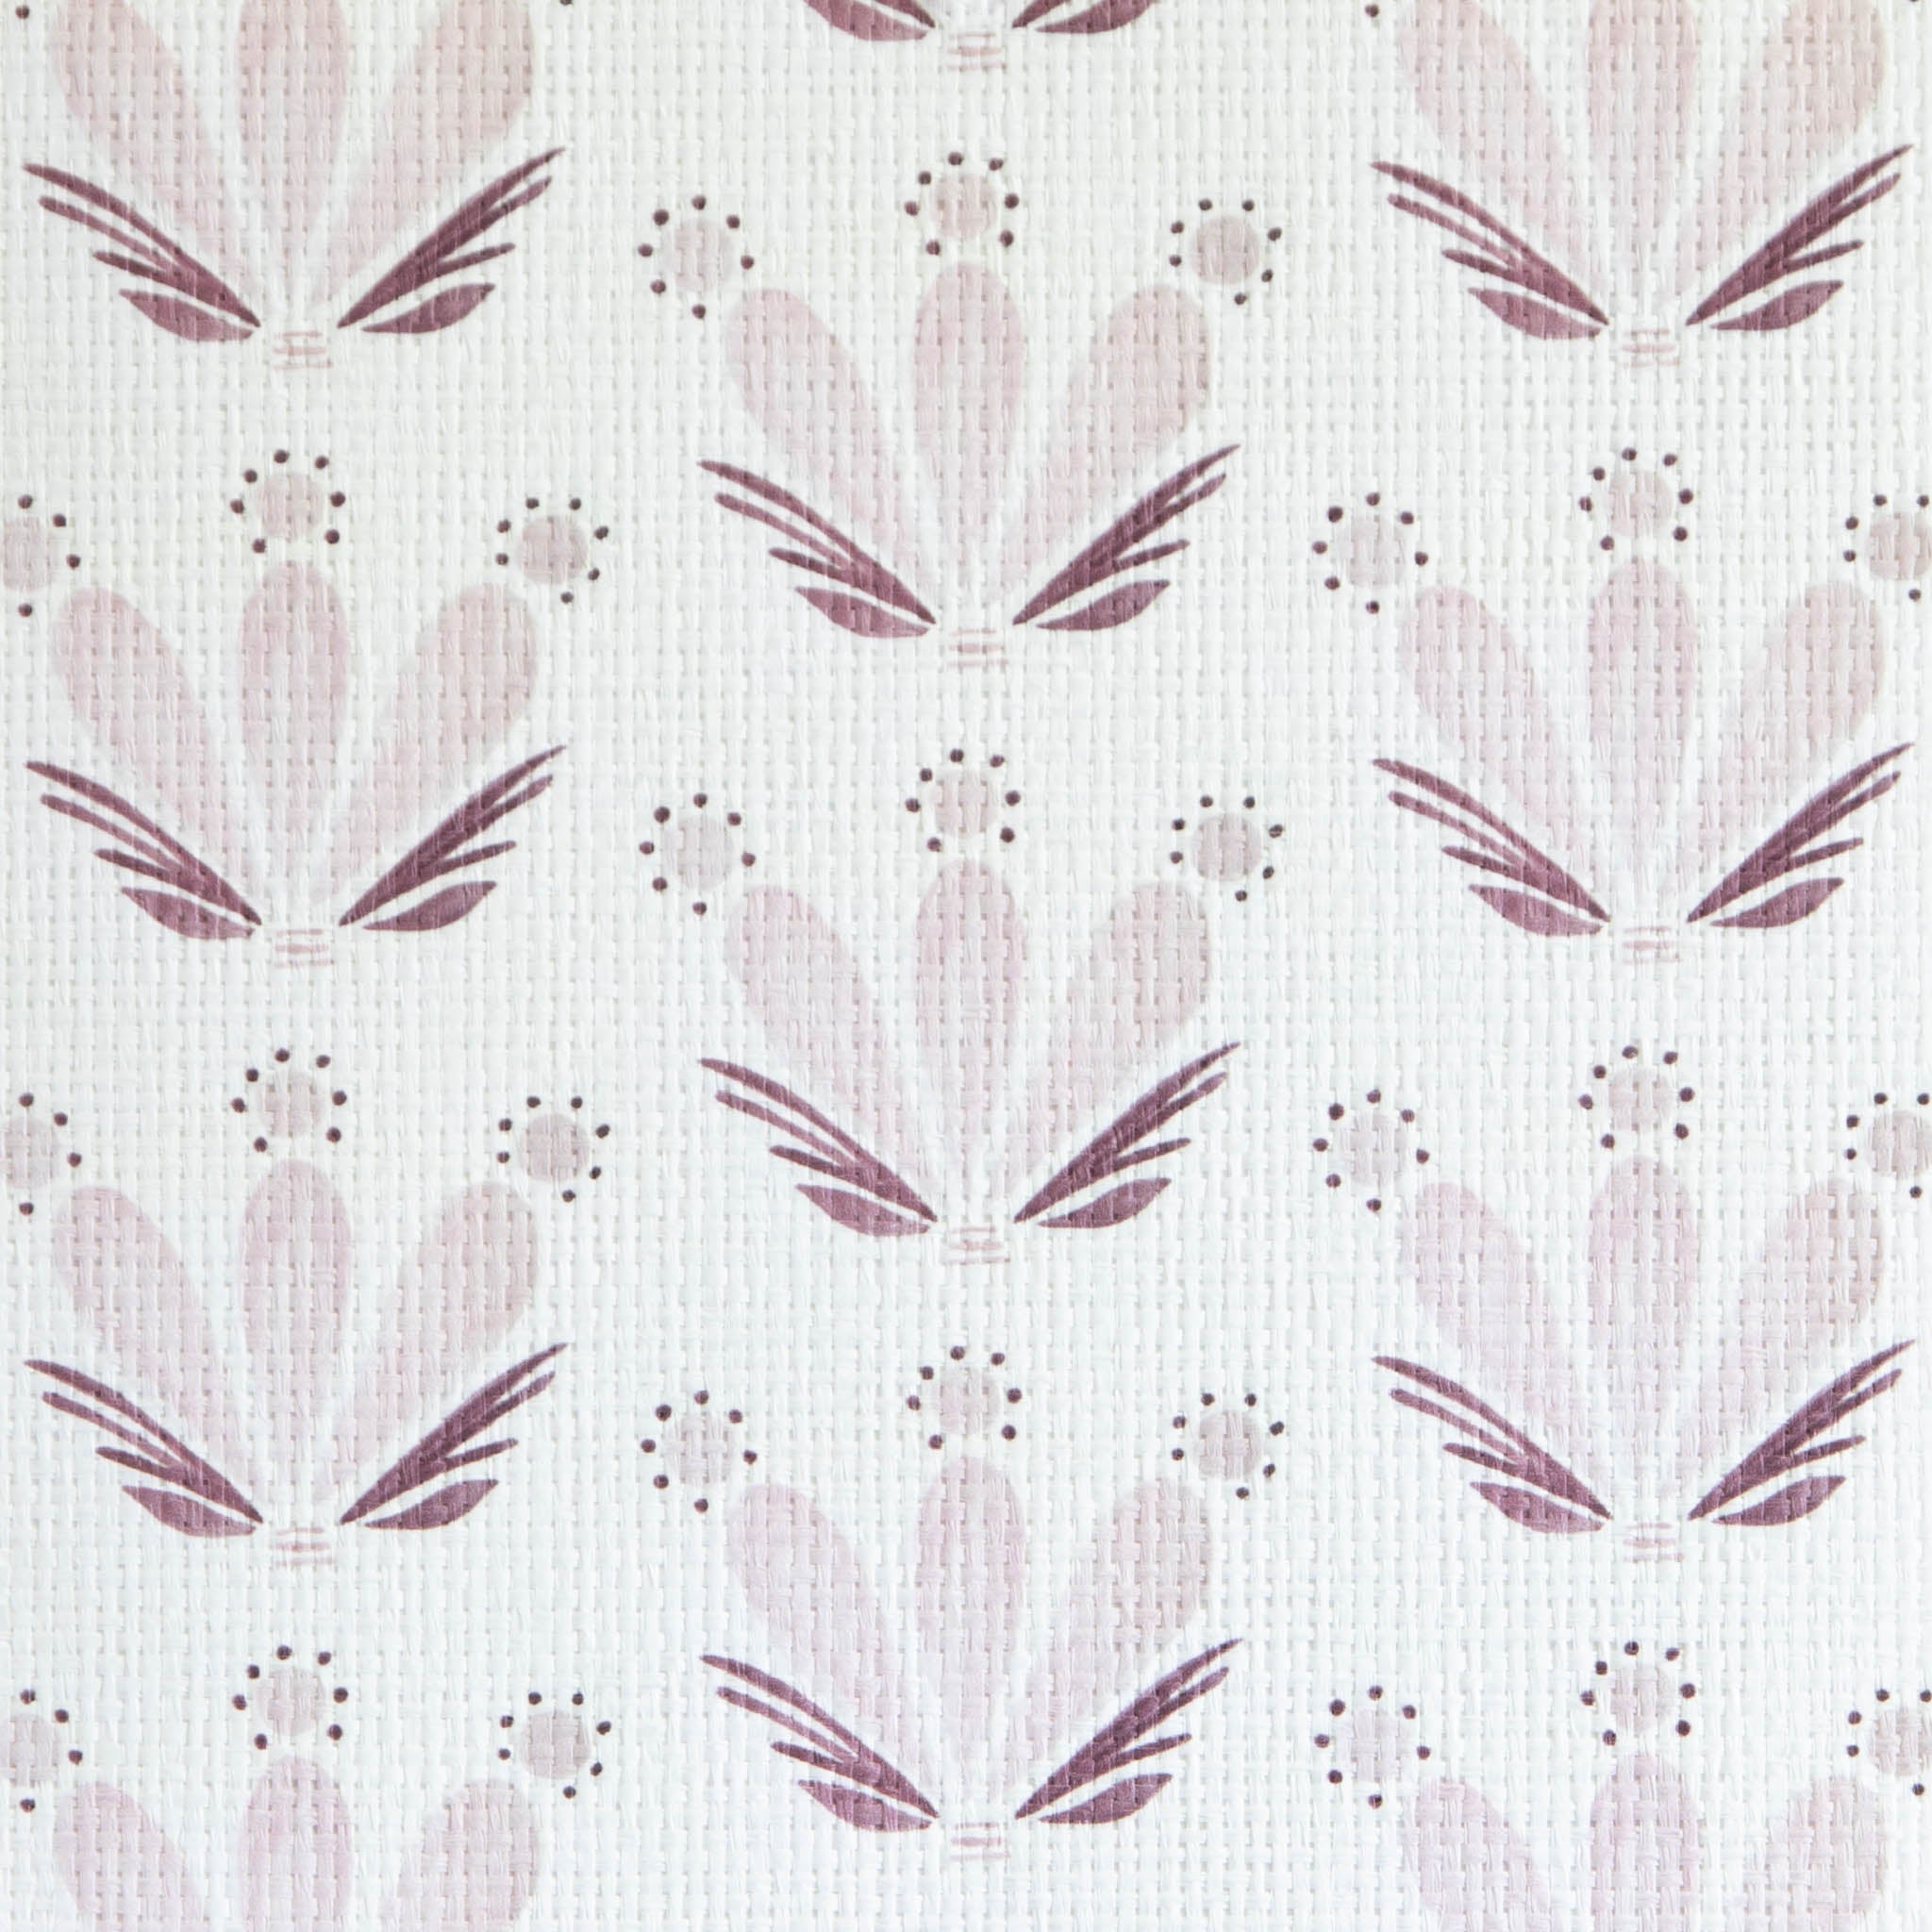 Pink & Burgundy Drop Repeat Floral Printed Grasscloth Wallpaper Swatch